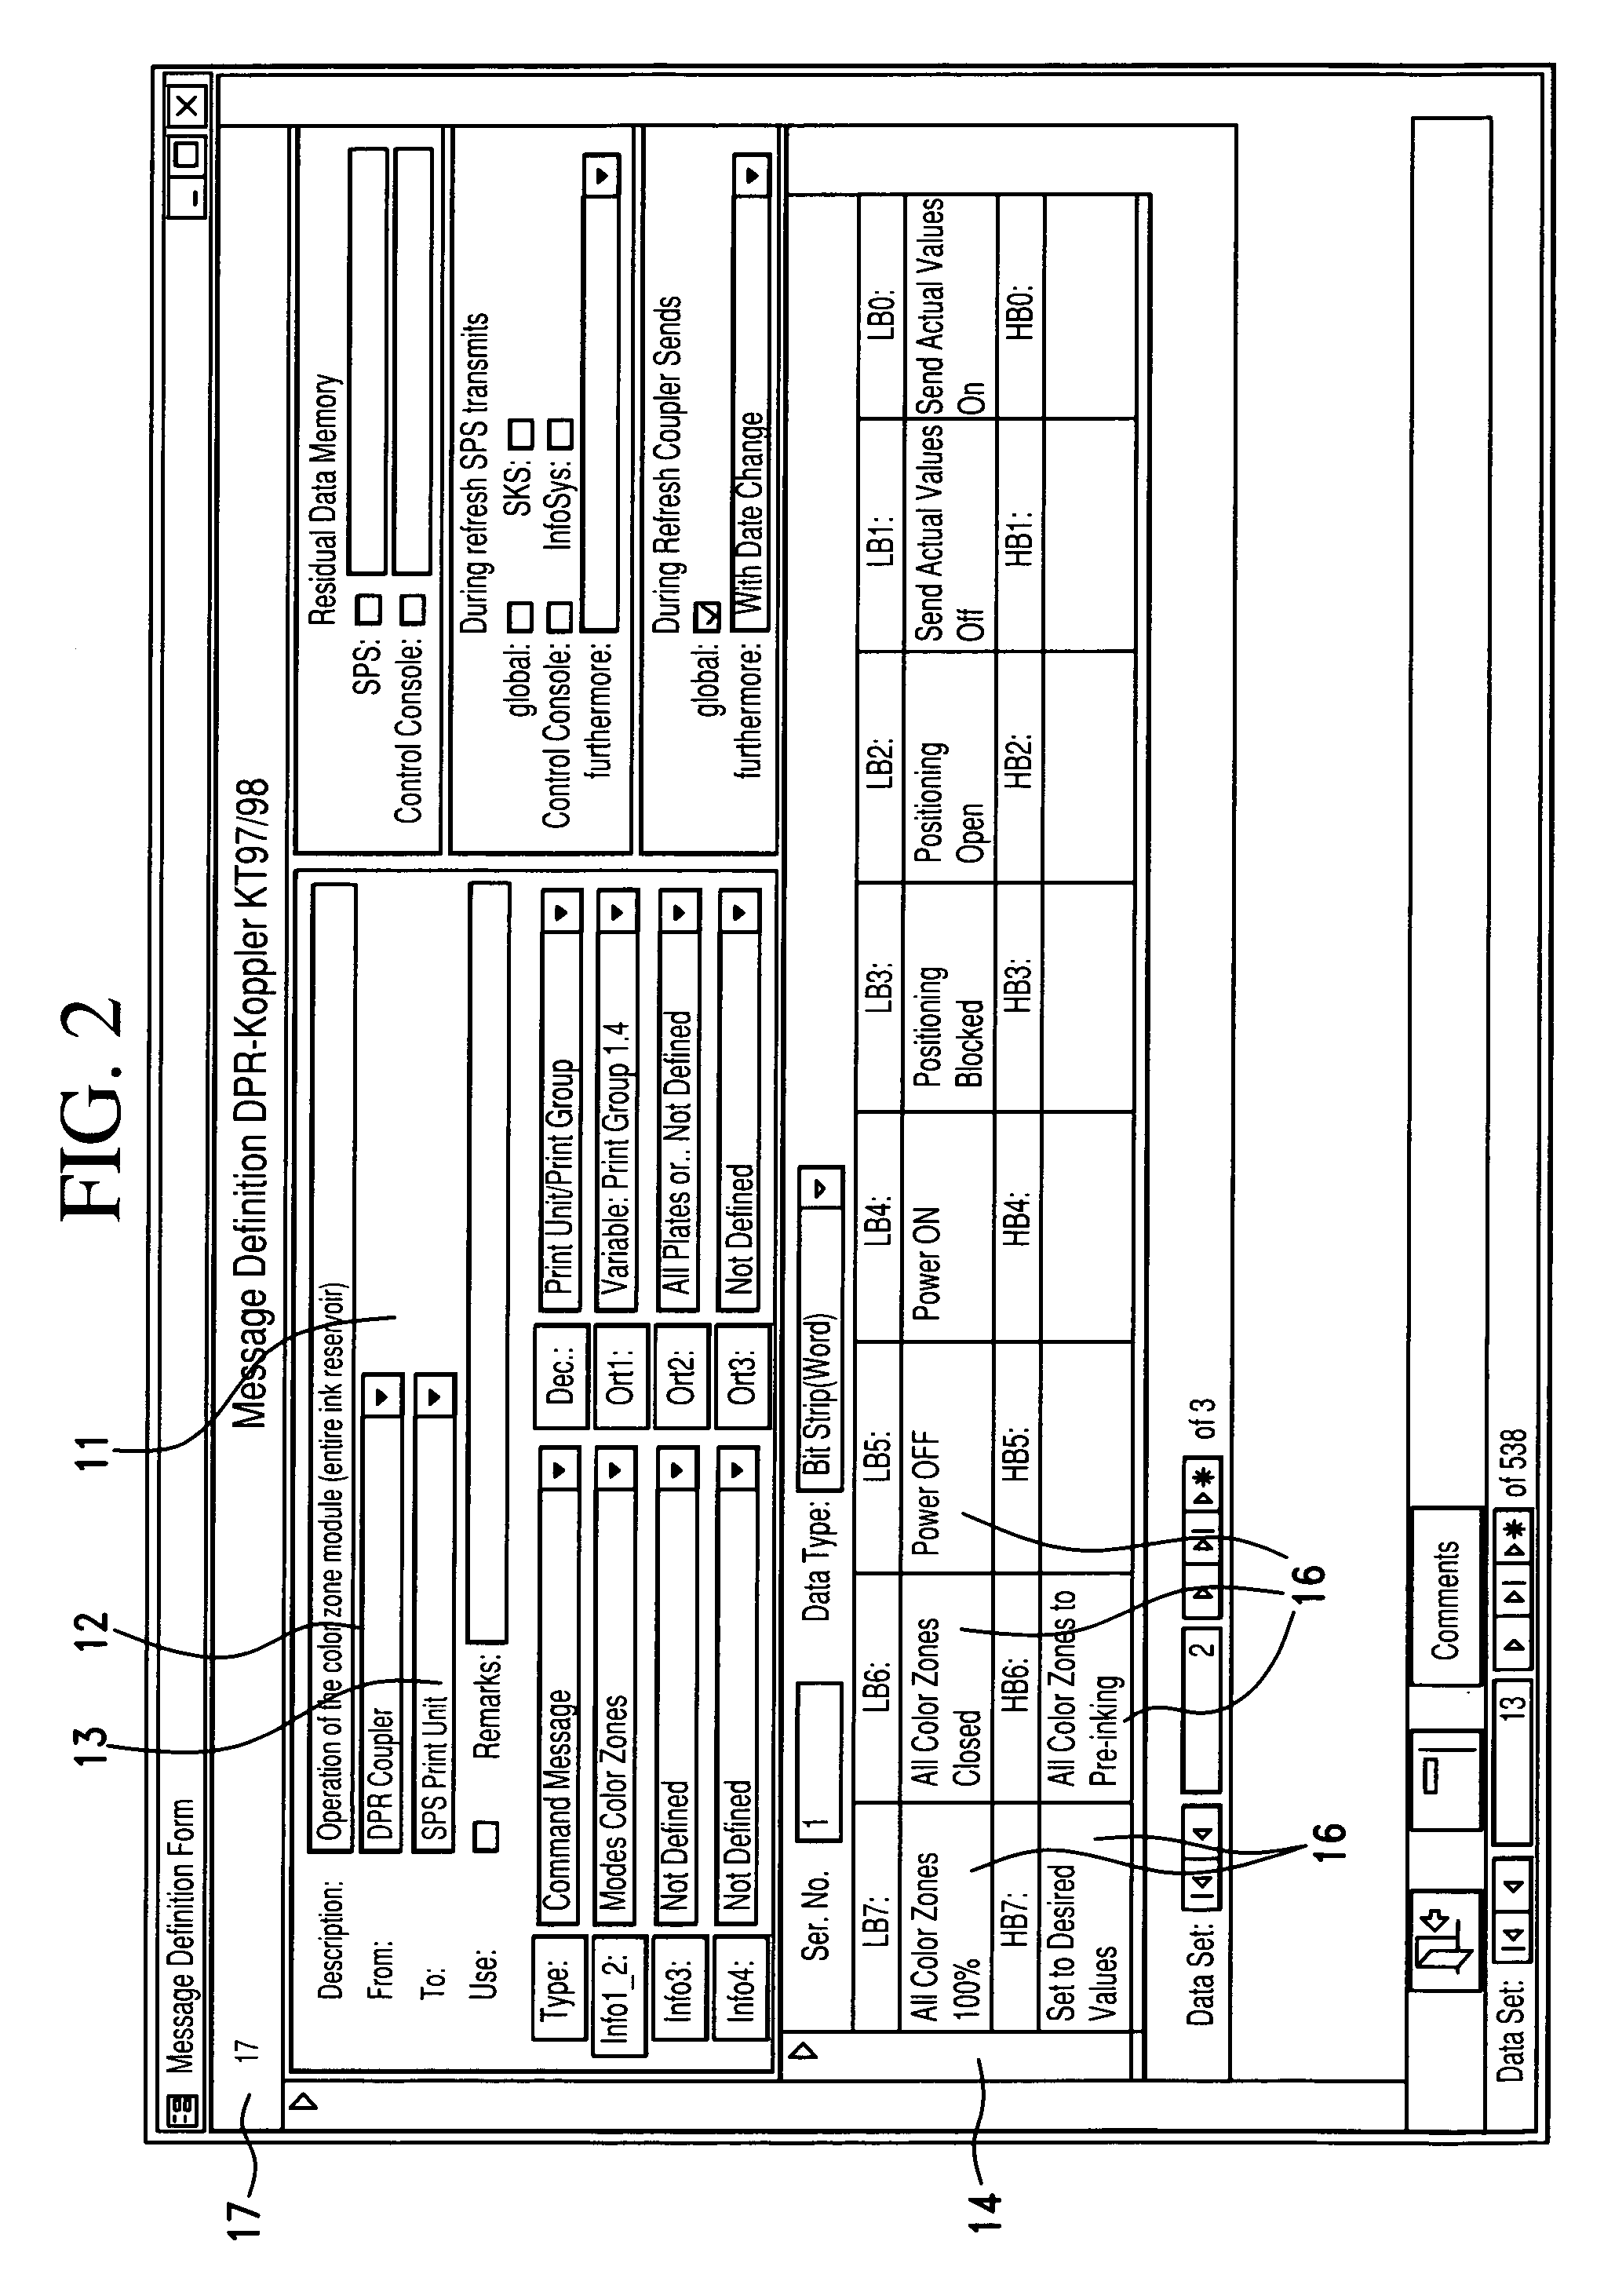 Method and device for performing a functionality test of a technical device